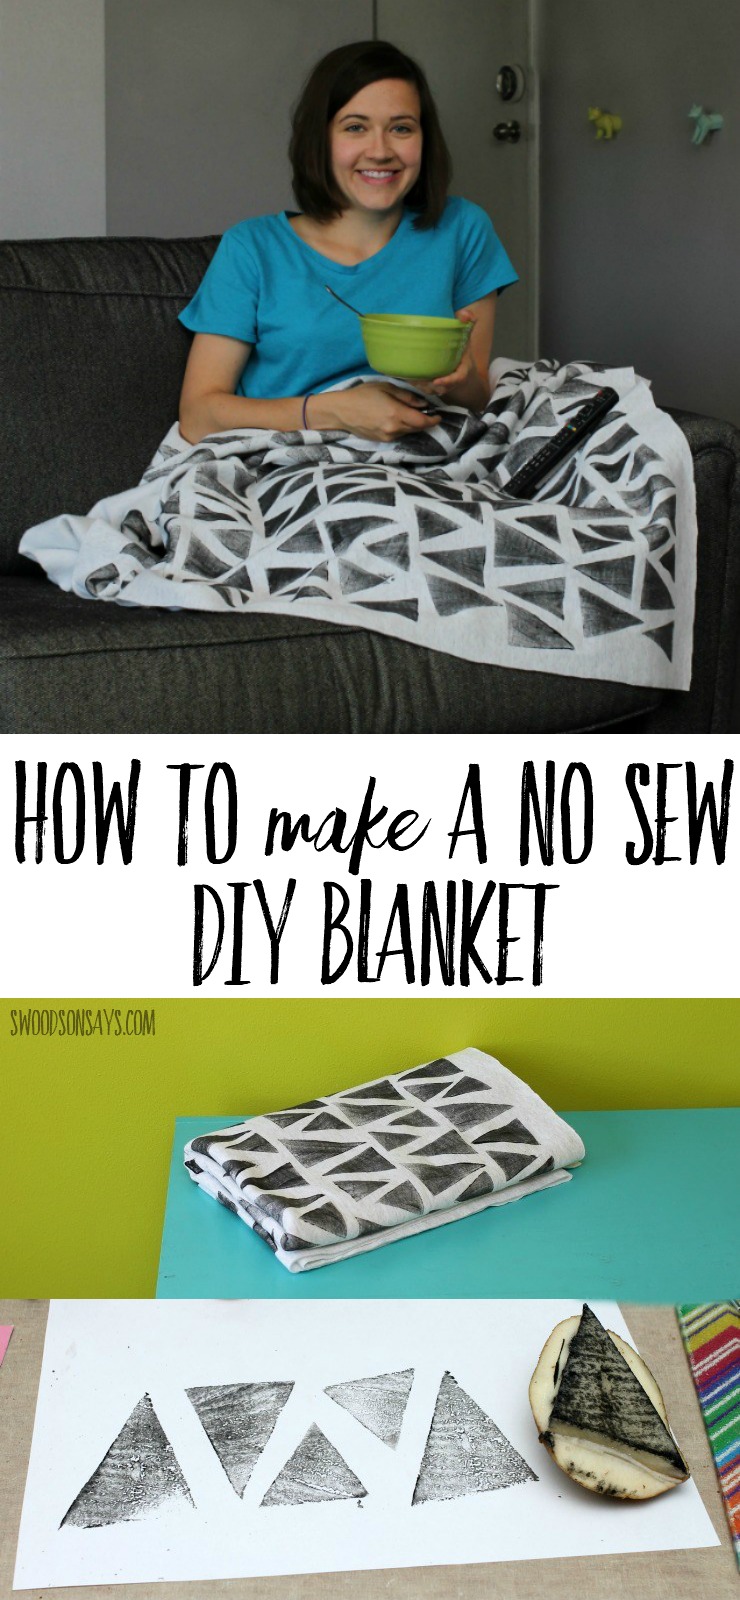 See how easy it is to make a no sew blanket, with this stamped sweatshirt version. A great tween craft idea diy gift for the couch potato in your life, blankets are so much fun to make. #diyblanket